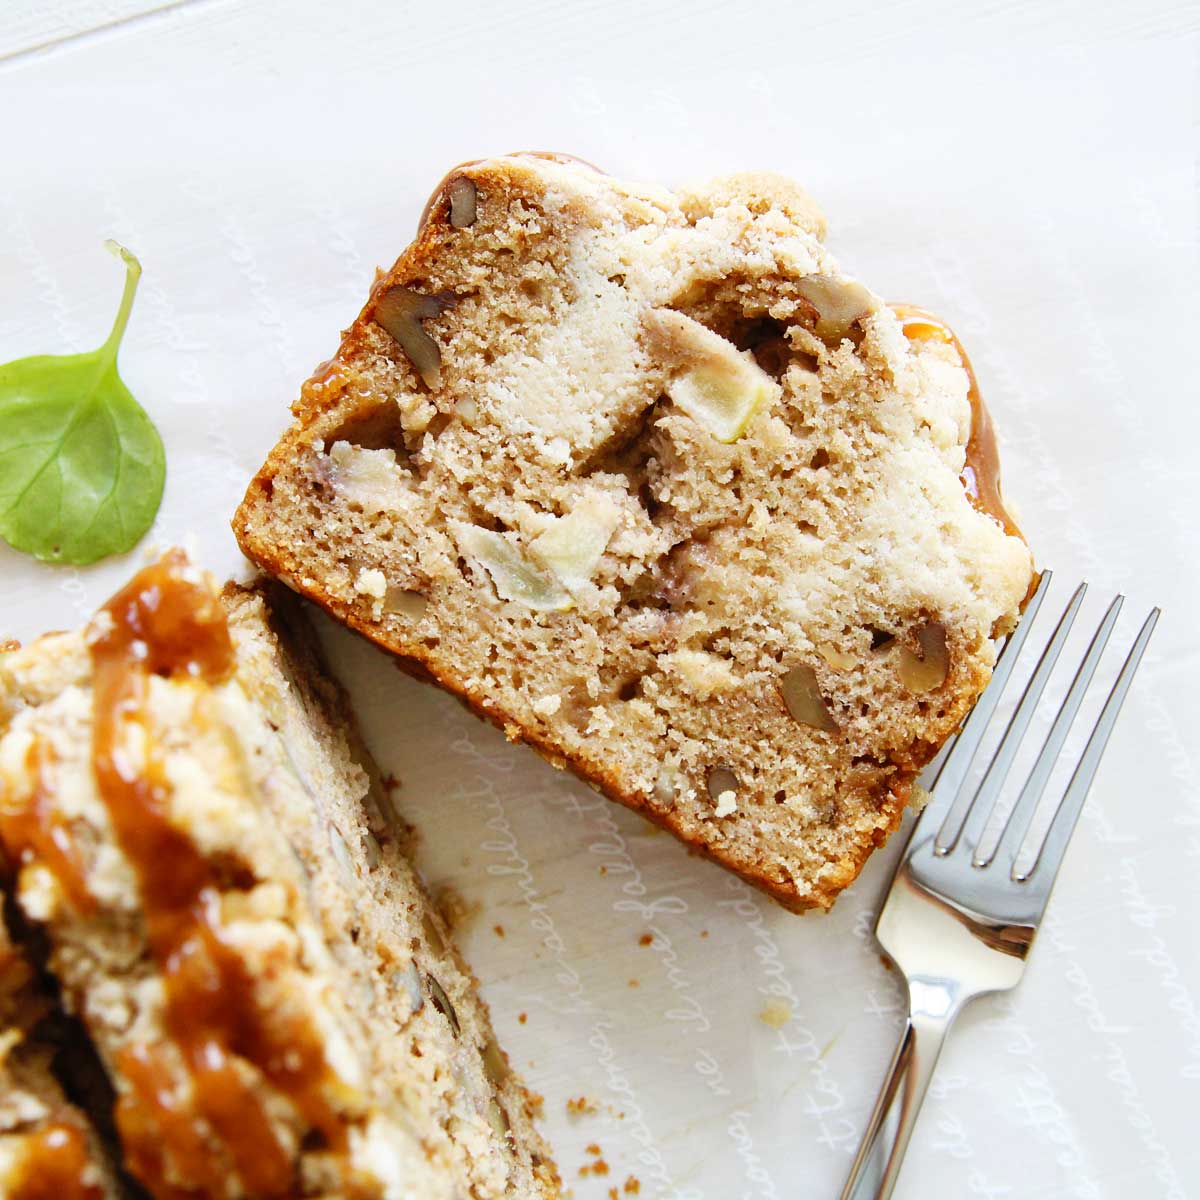 The Most Comforting Applesauce Banana Bread with Streusel Topping - Birthday Cake Banana Bread